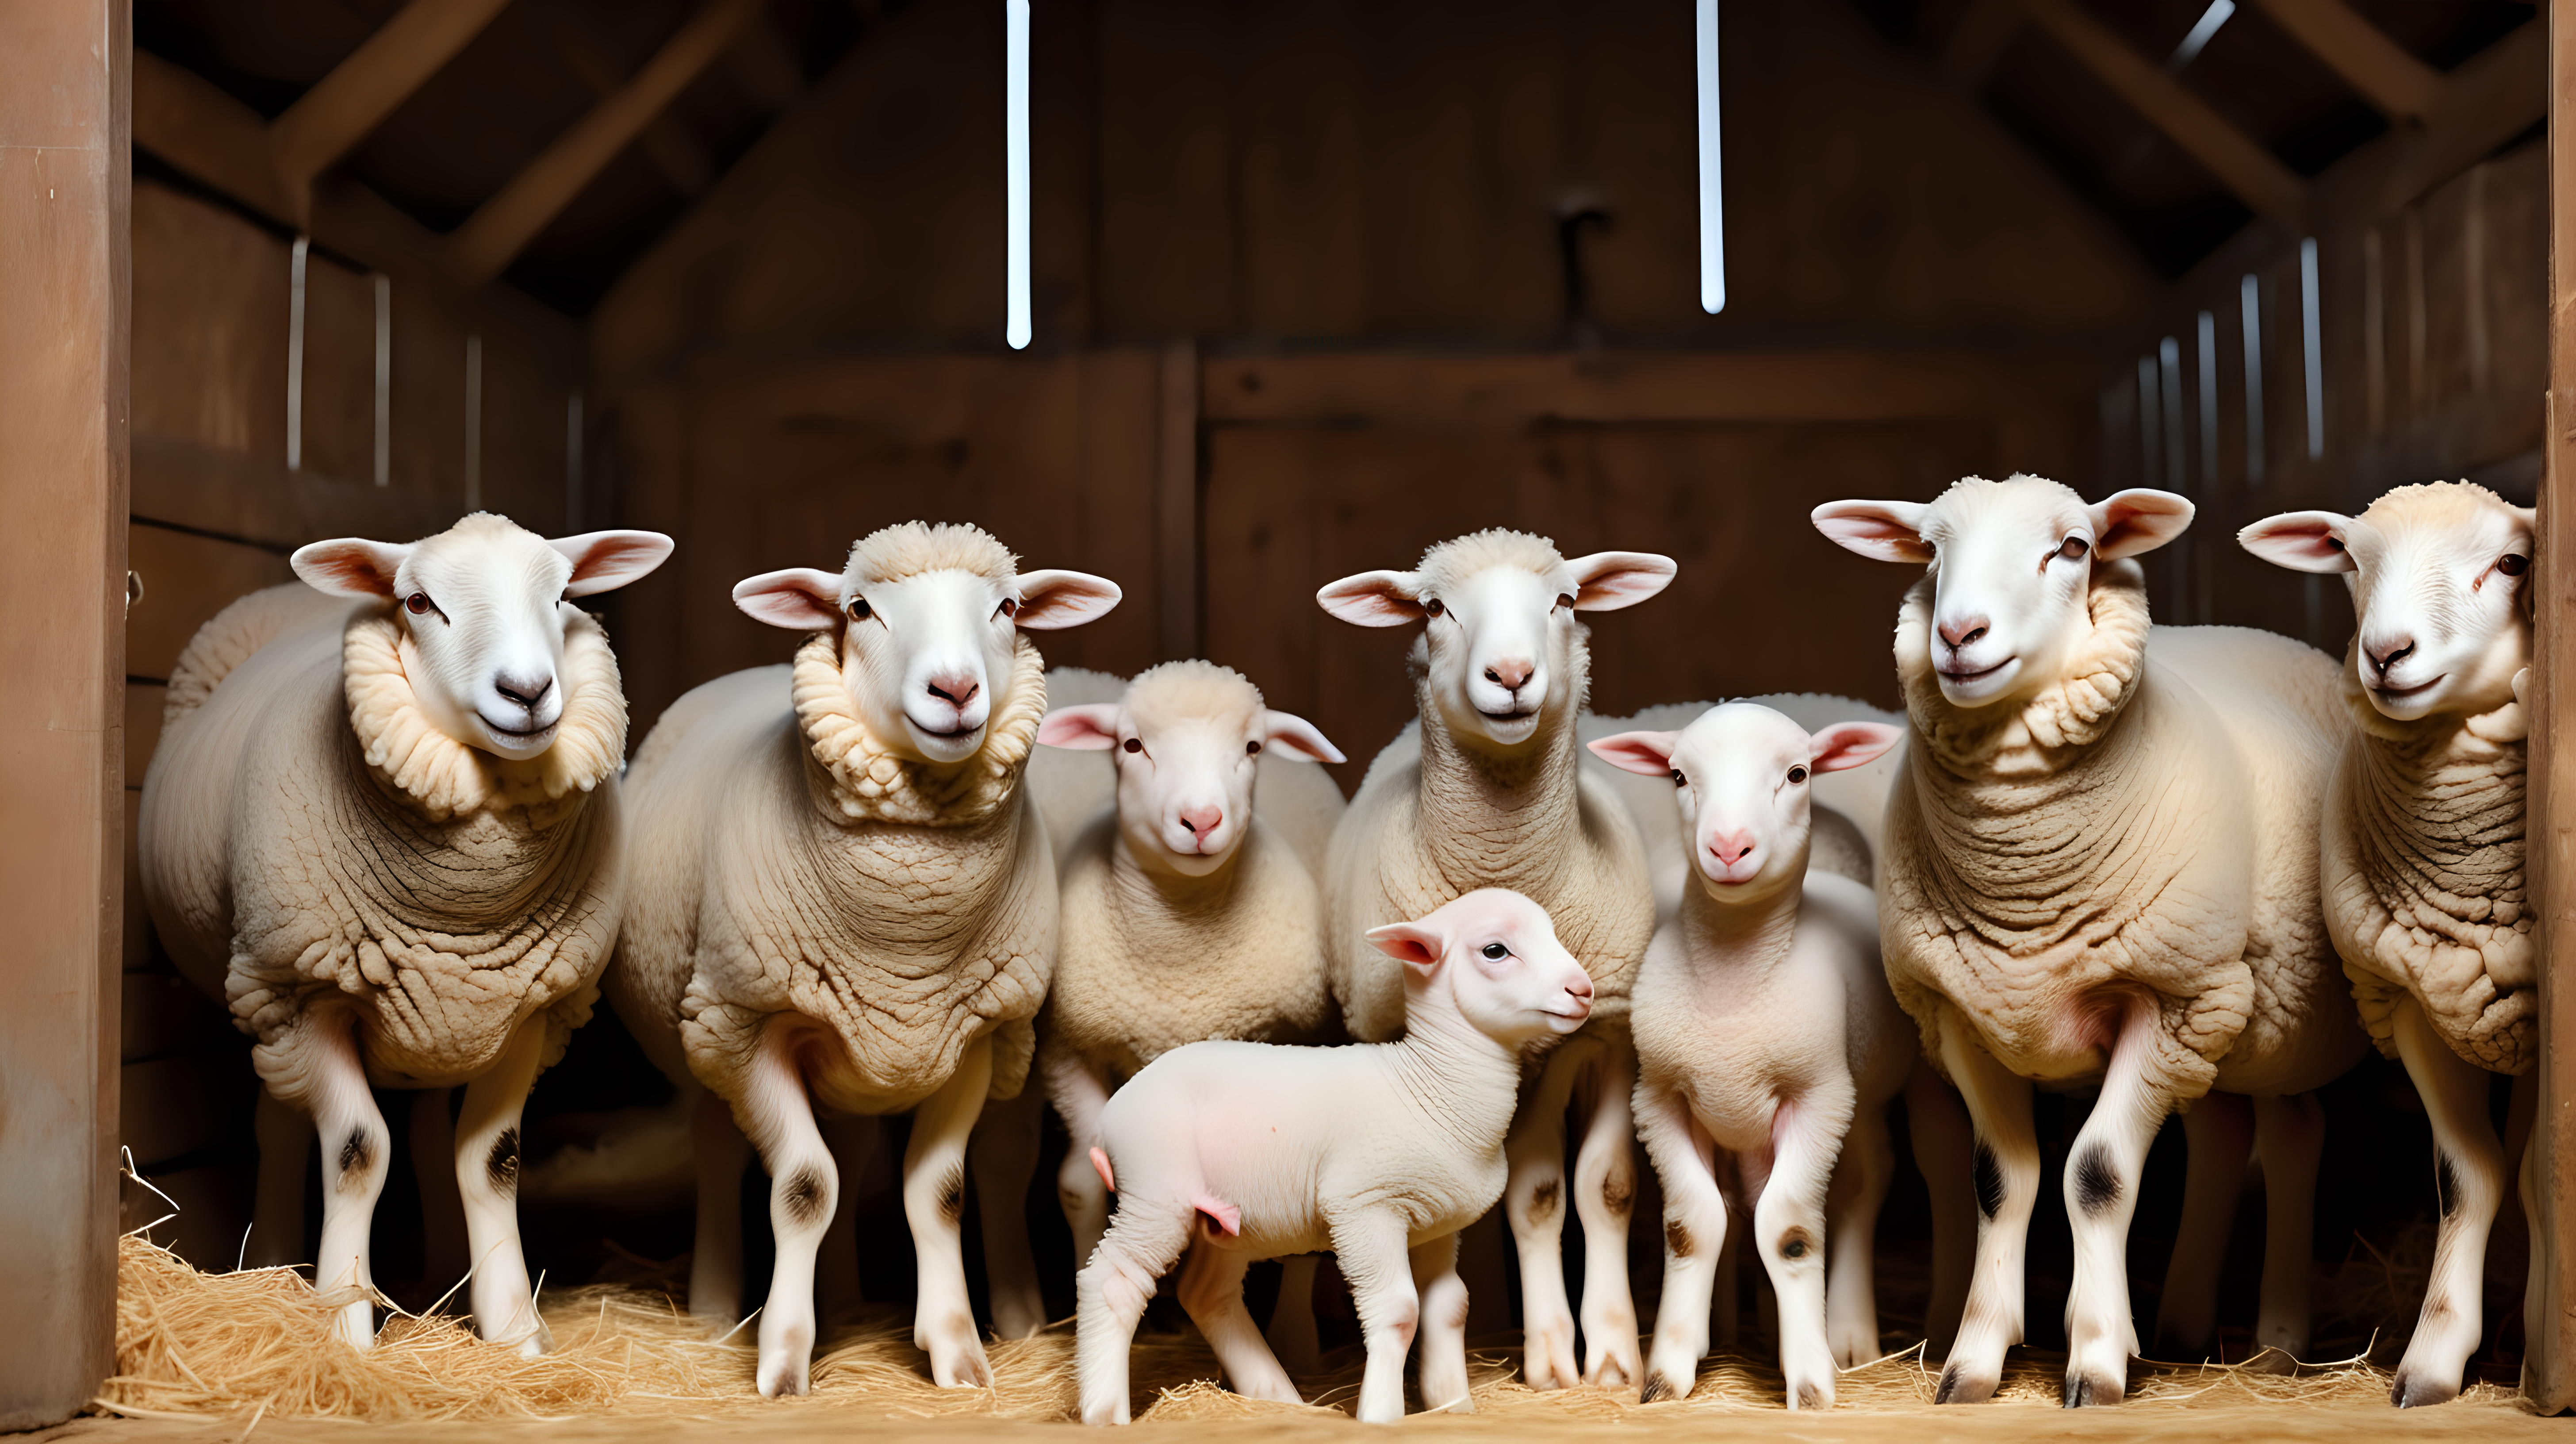 Sheep stable. Group of sheep domestic animals in barn feeding their lamb babies, isolated on background, photo shoot